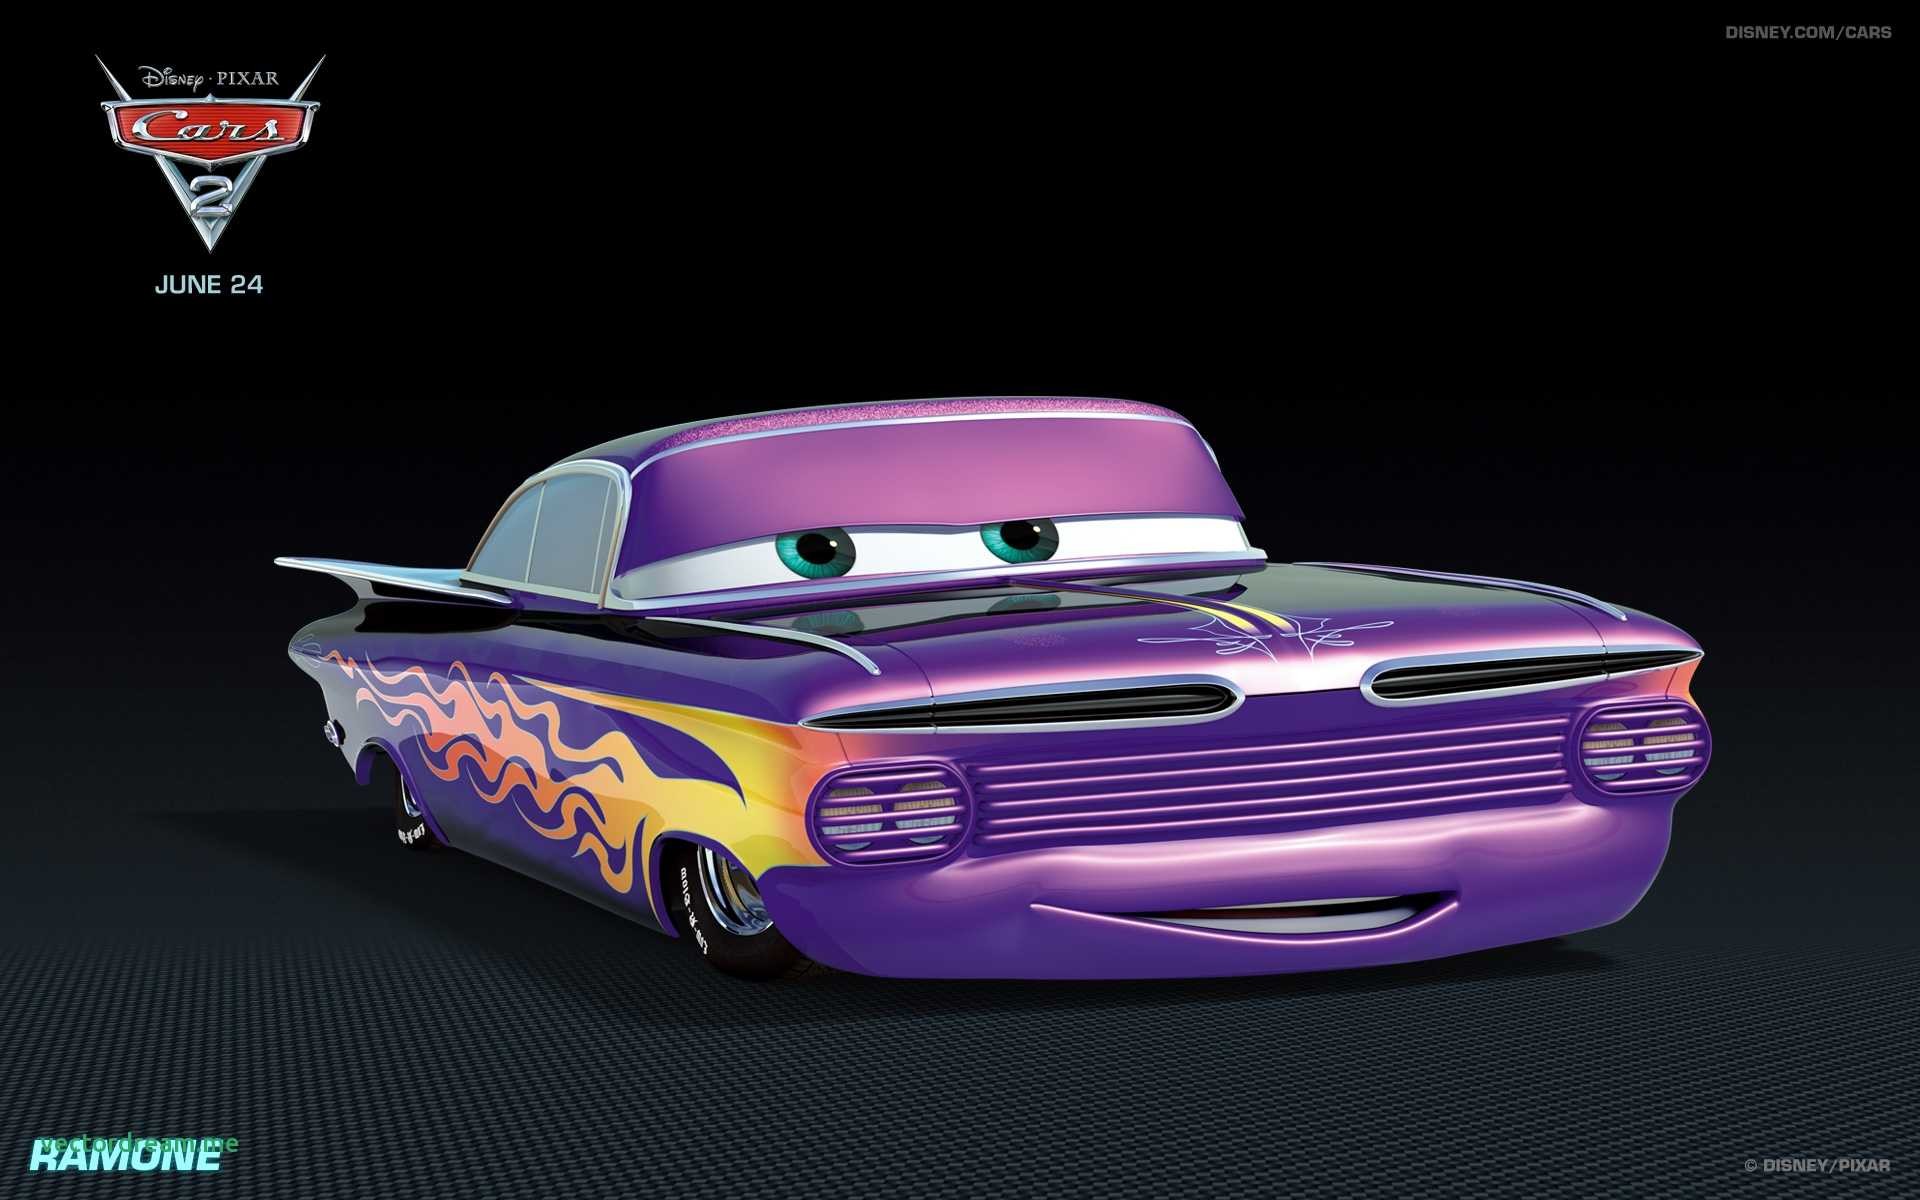 1920x1200 Cars Movie Wallpaper Hd Unique Disney Cars Backgrounds Free Download